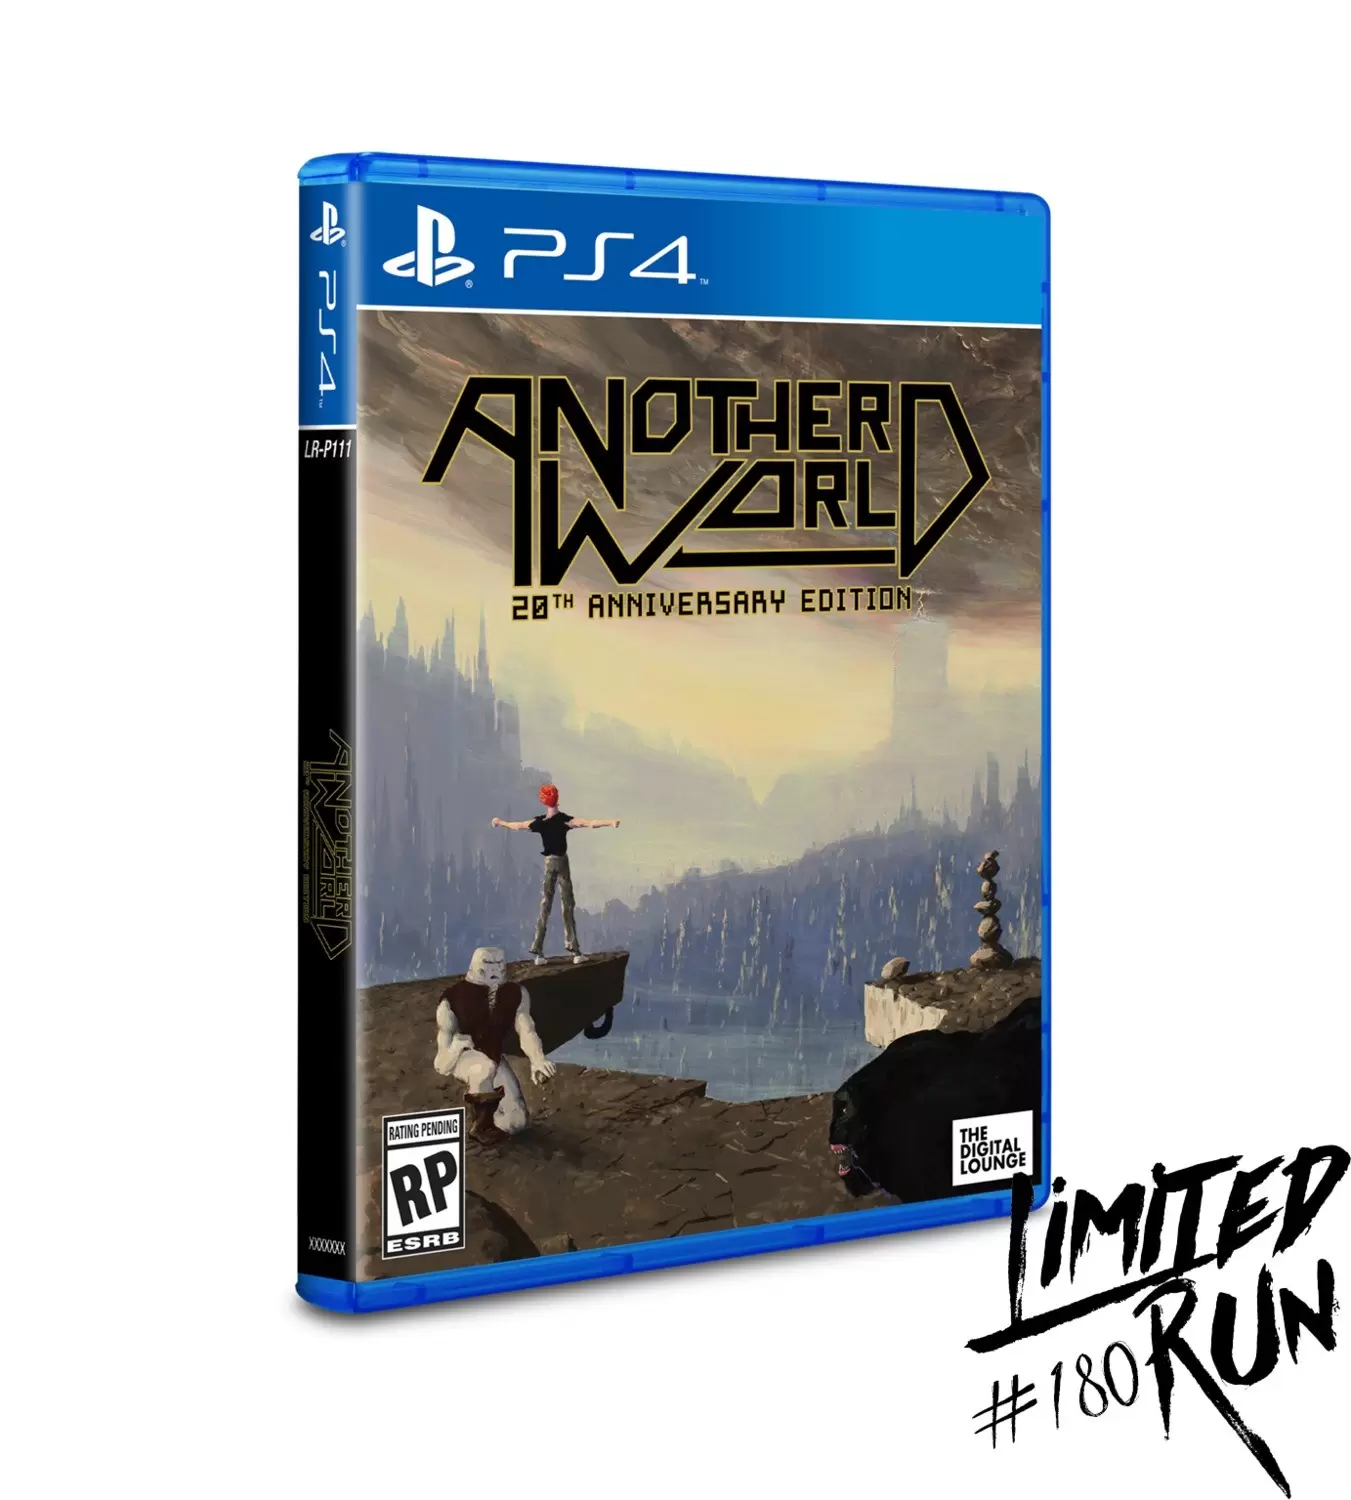 PS4 Games - Another World